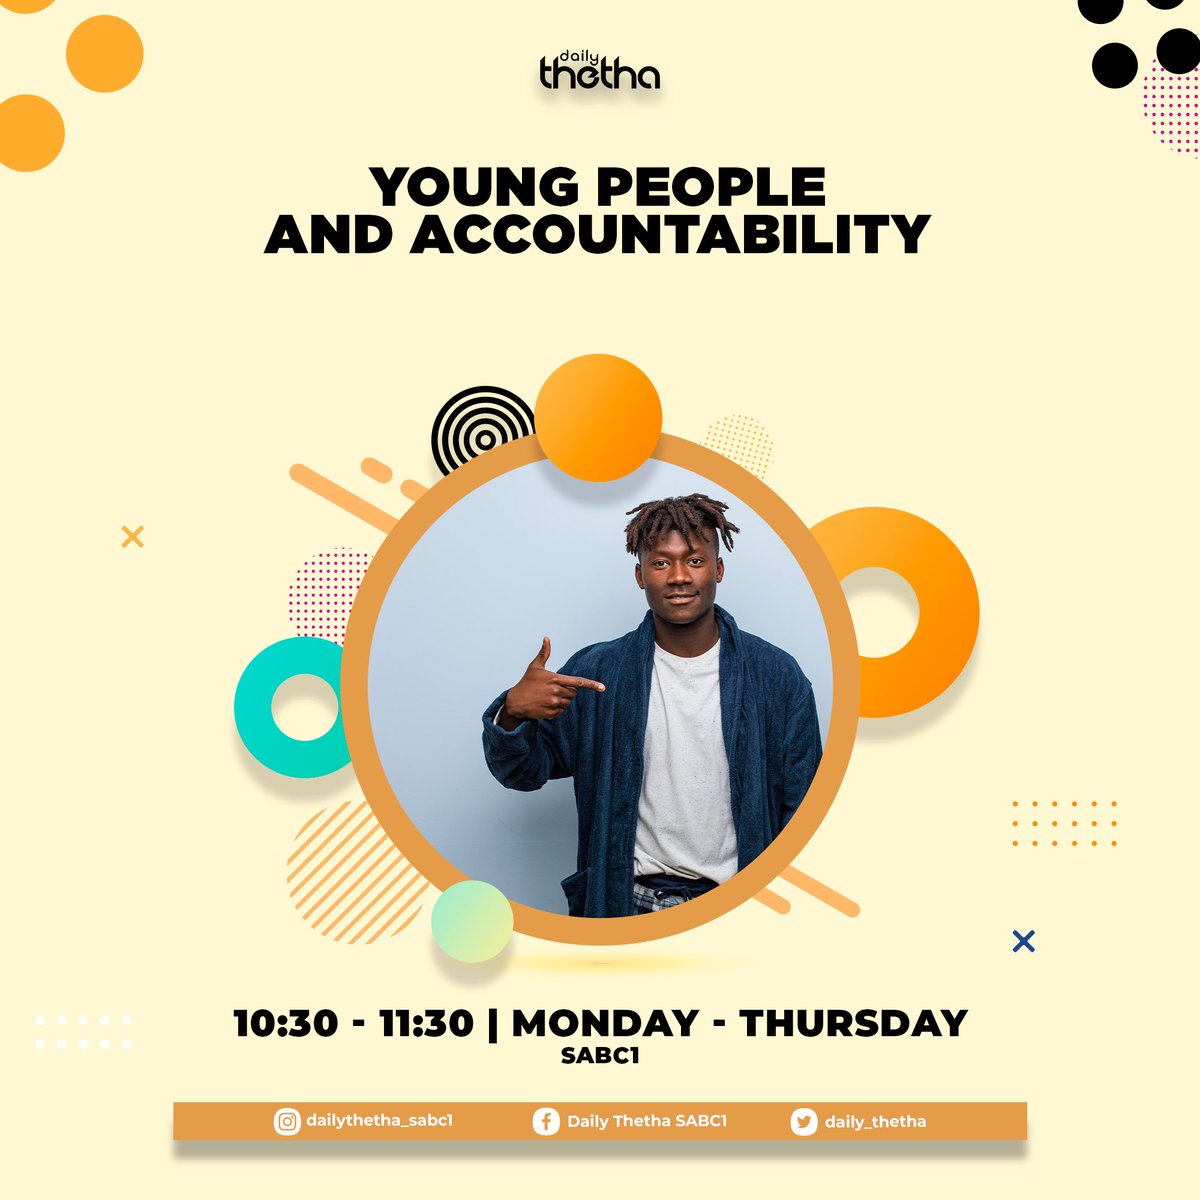 Today, we discuss accountability with young people and the older generation.

Catch Daily Thetha at 10h30 every Monday to Thursday on SABC1.

#SABCEducation